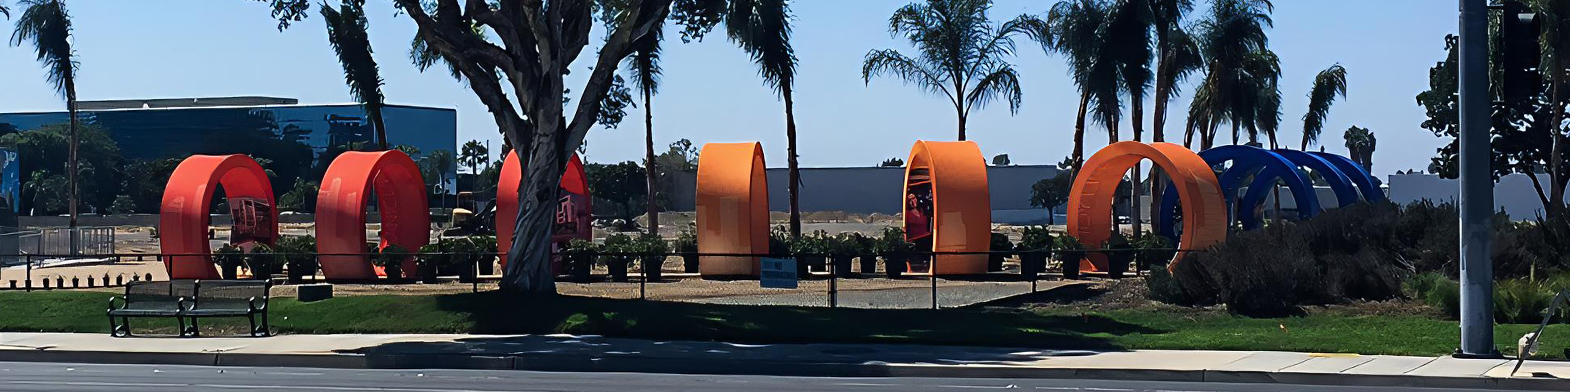 Metal Tube Frame Arches Covered In Orange High Performance Stretch Fabric